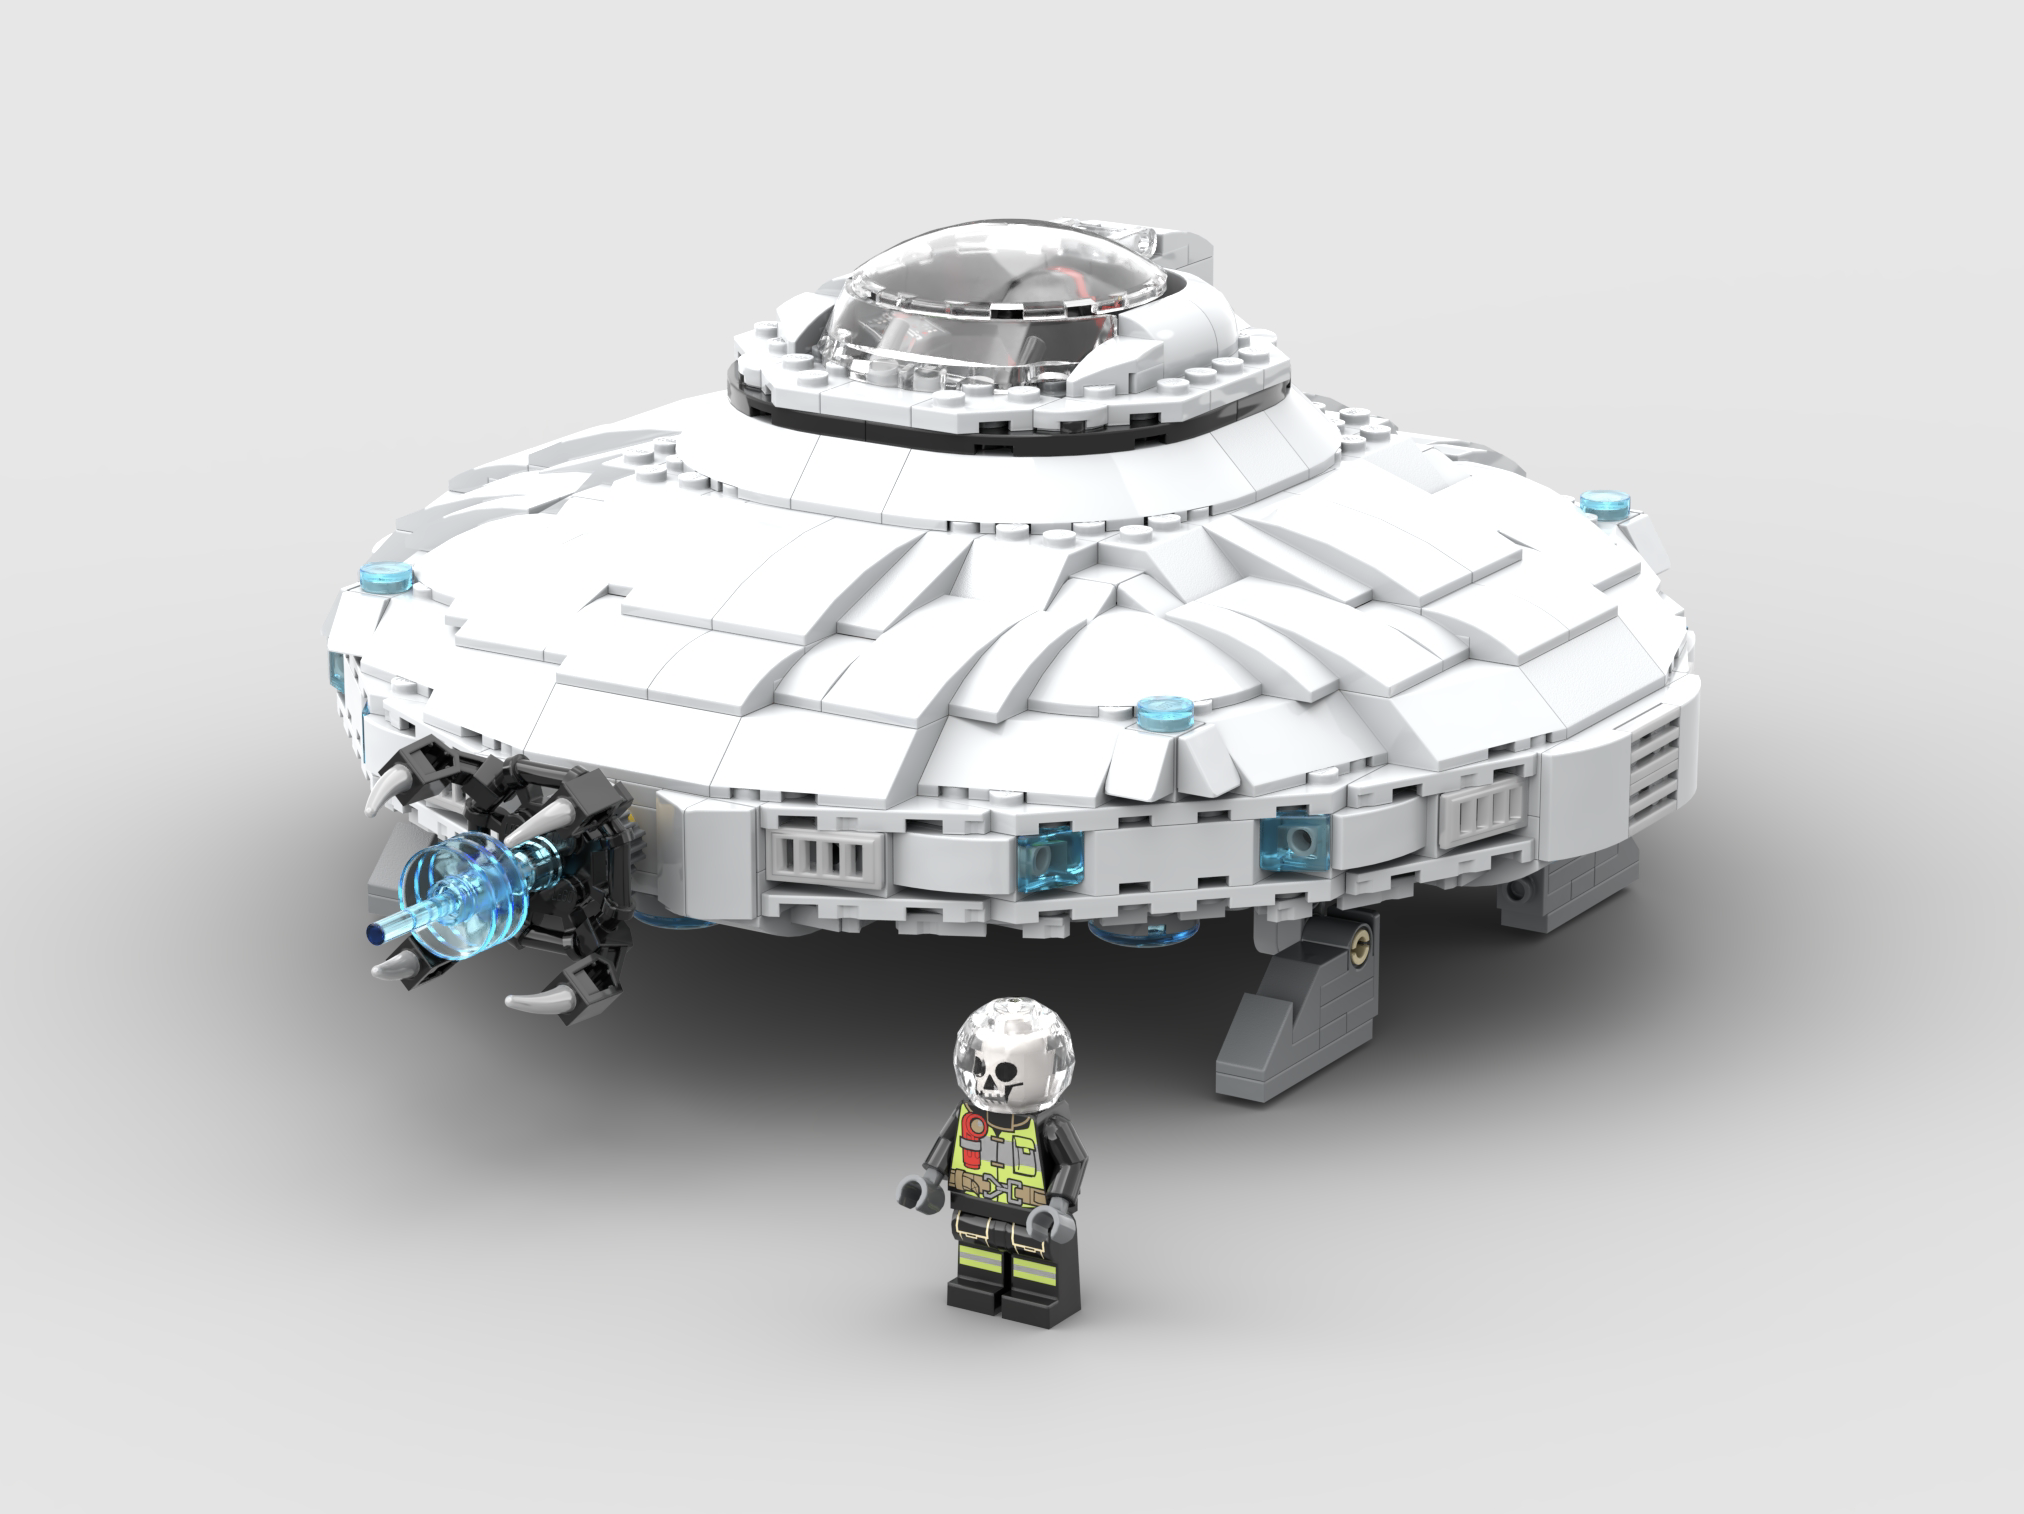 12 Fan-Designed LEGO Sets Vying to Become the Real Deal